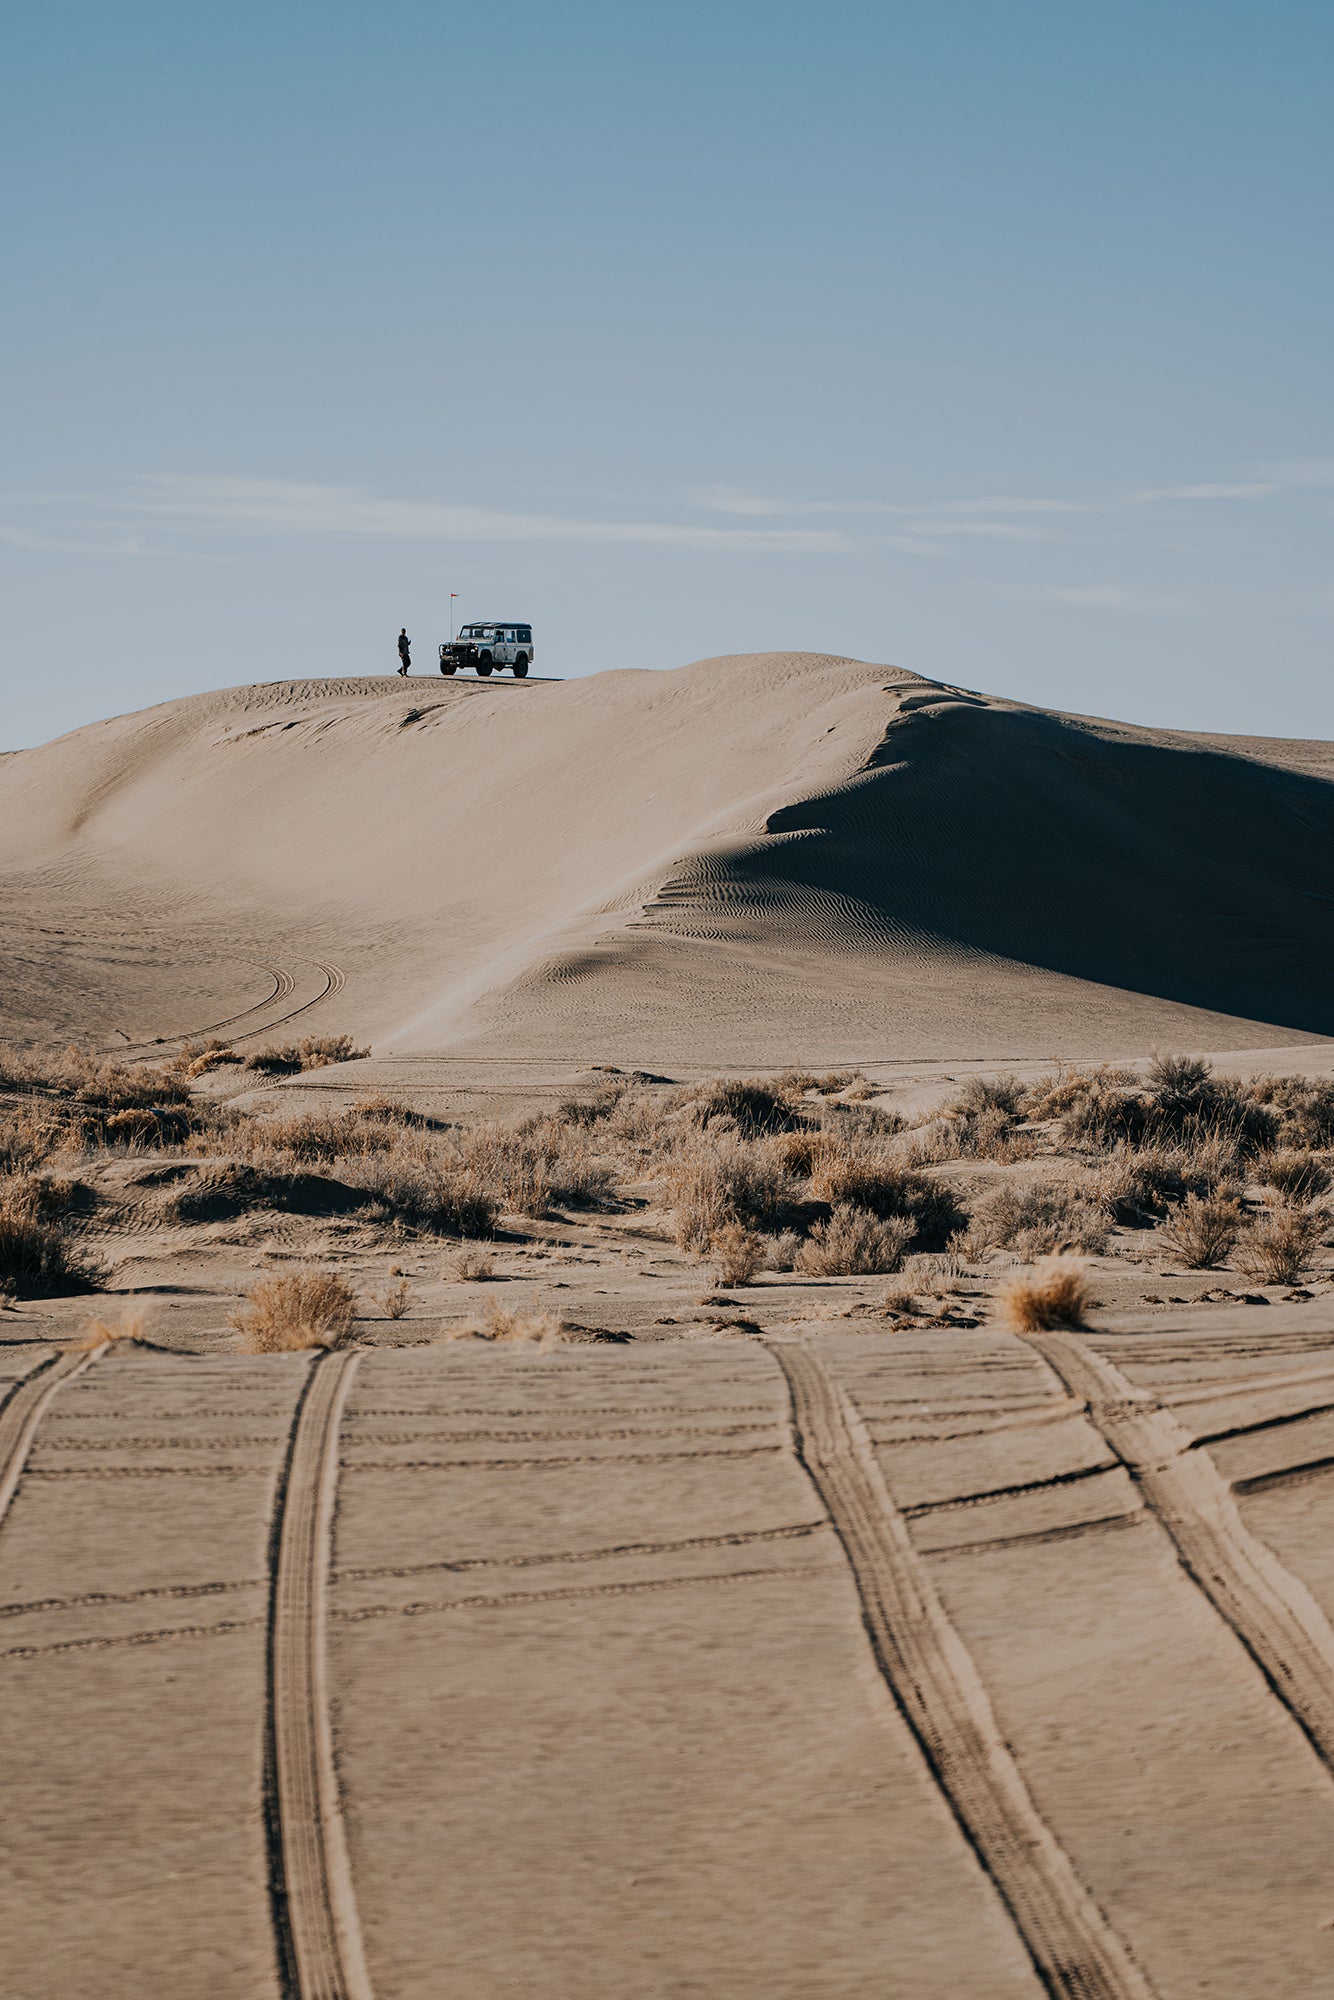 Tips for driving in the desert - Driving techniques for sand dunes and rocky terrain